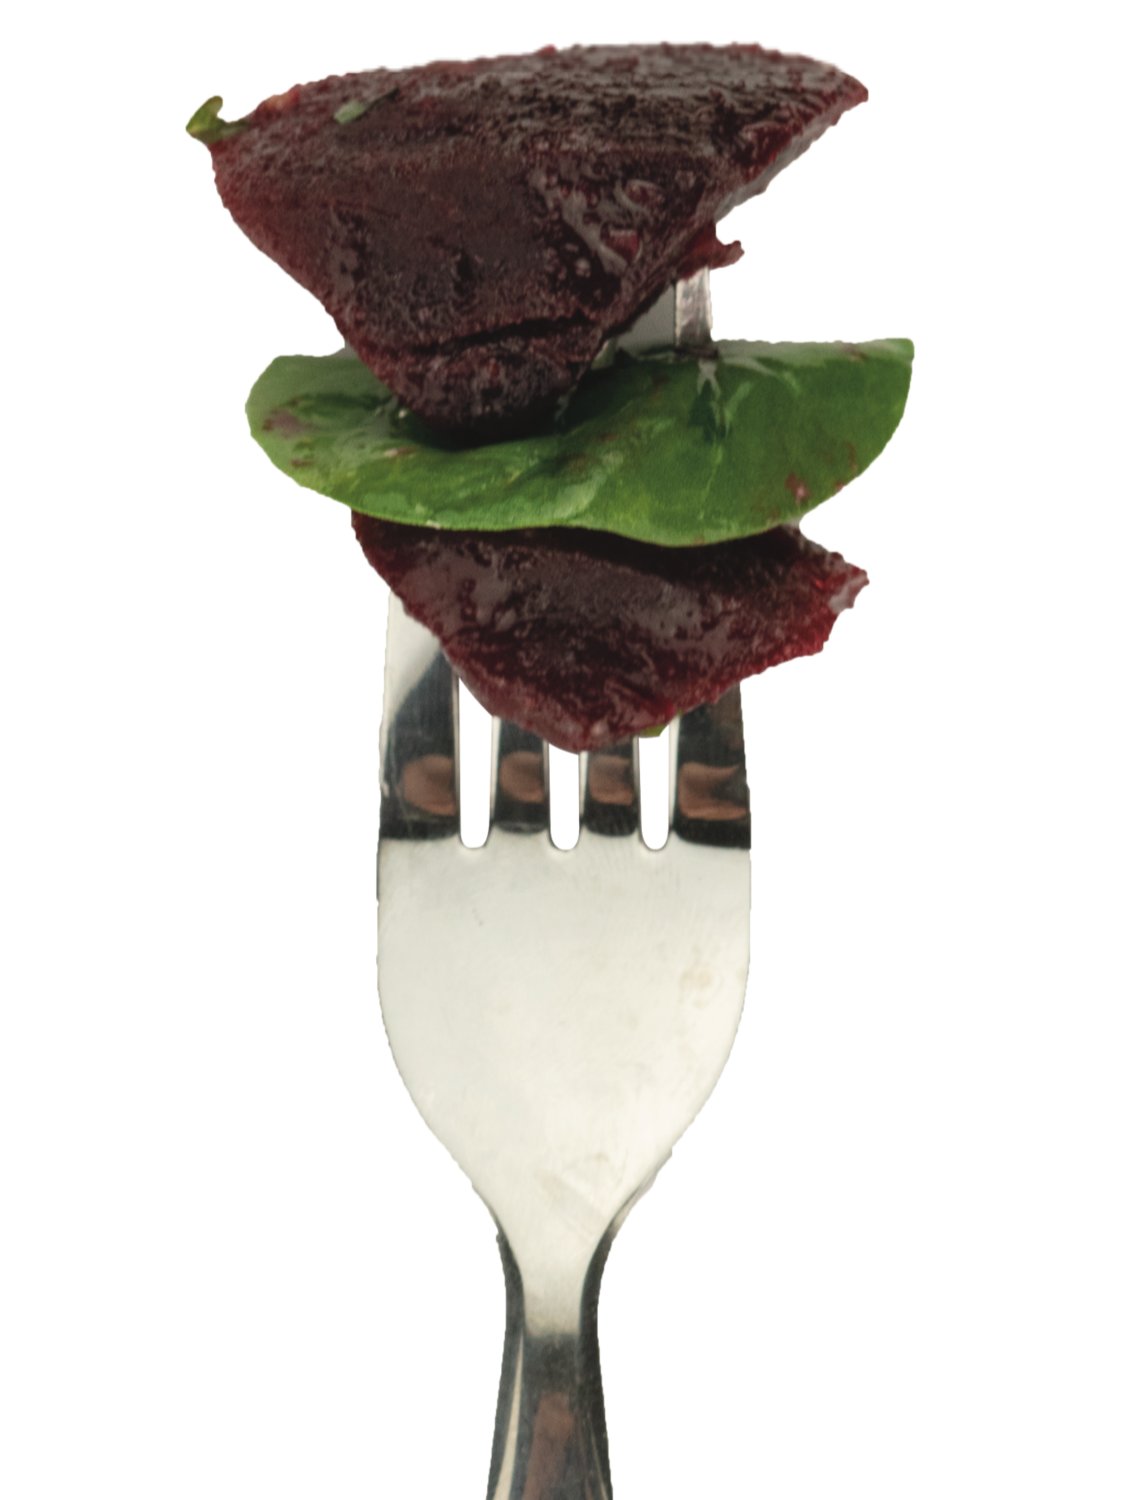 Maple Glazed Beets: tossed with julienne onions, mixed with baby spinach.